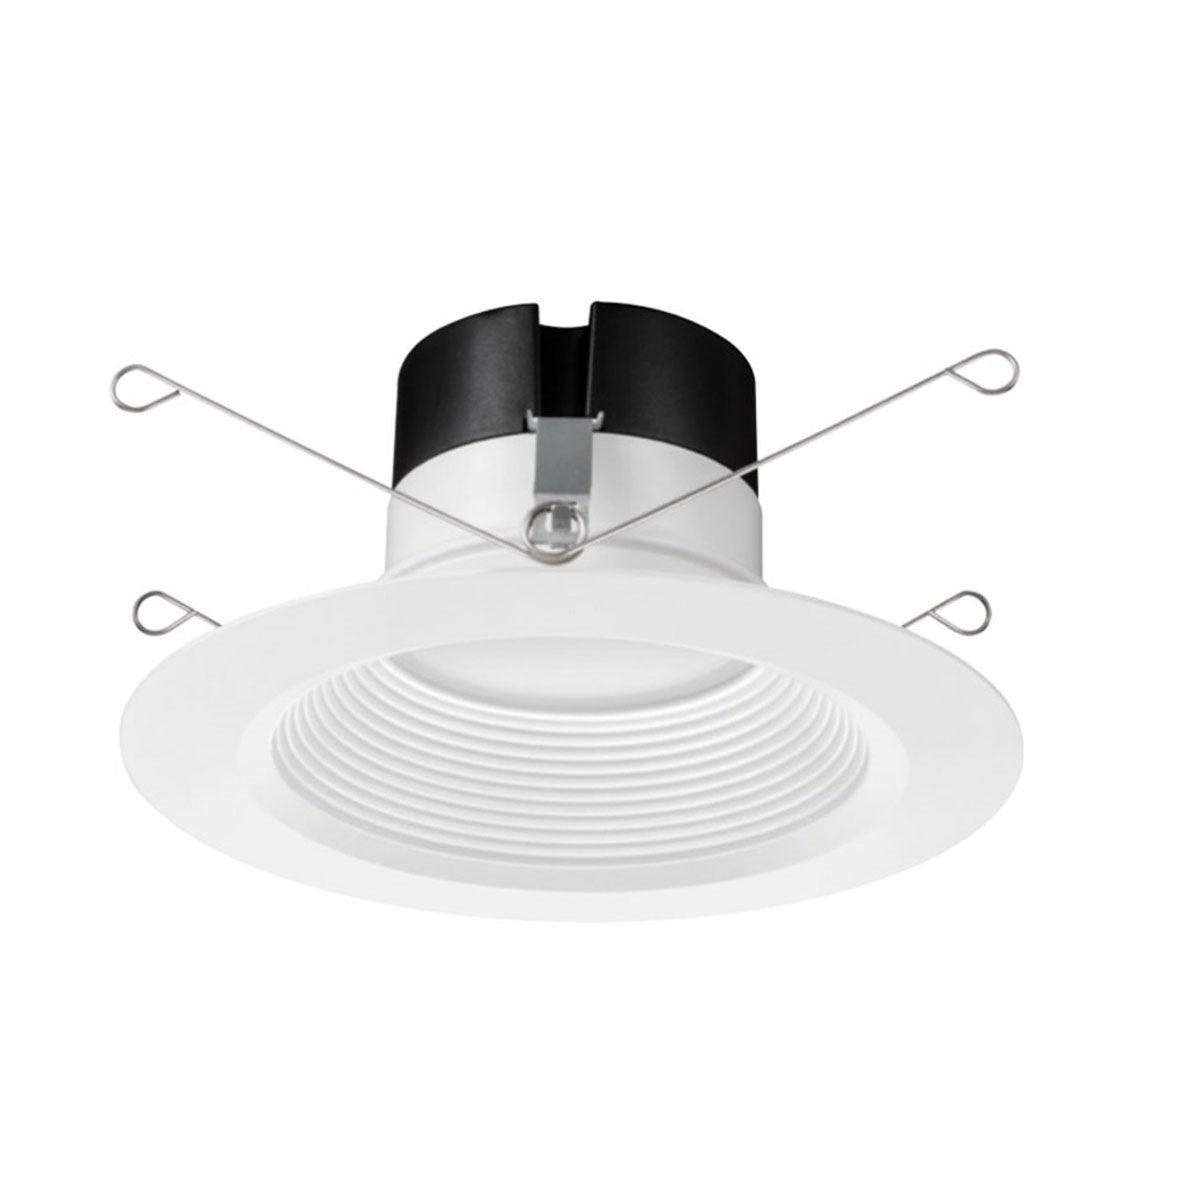 6 Inch Recessed LED Can Light, Round, 13 Watt, 1200 Lumens, Selectable CCT, 2700K to 5000K, Baffle Trim - Bees Lighting